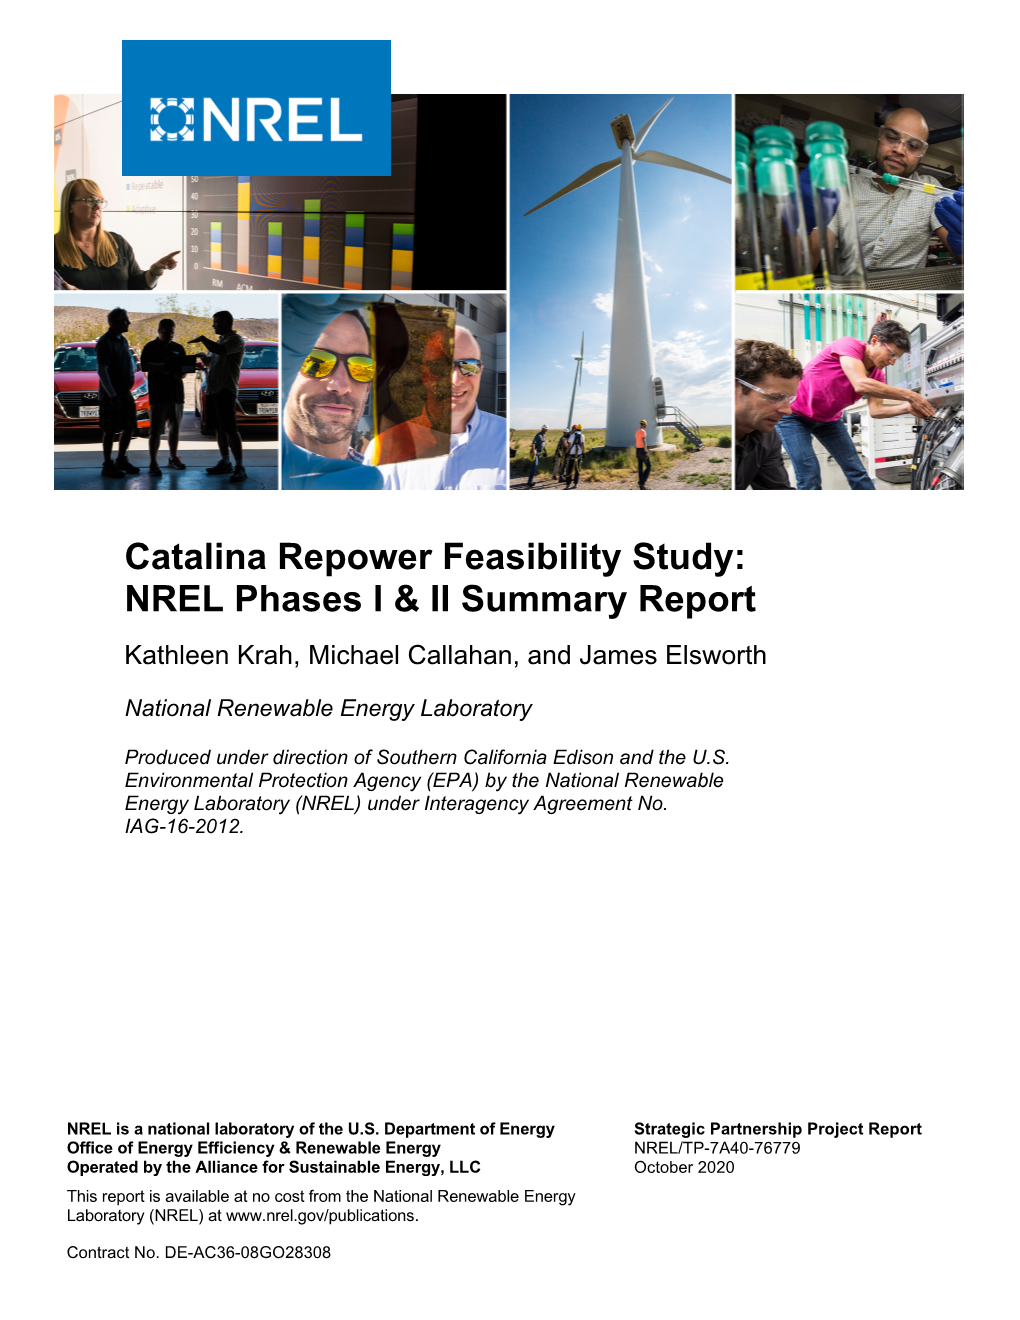 Catalina Repower Feasibility Study: NREL Phases I & II Summary Report